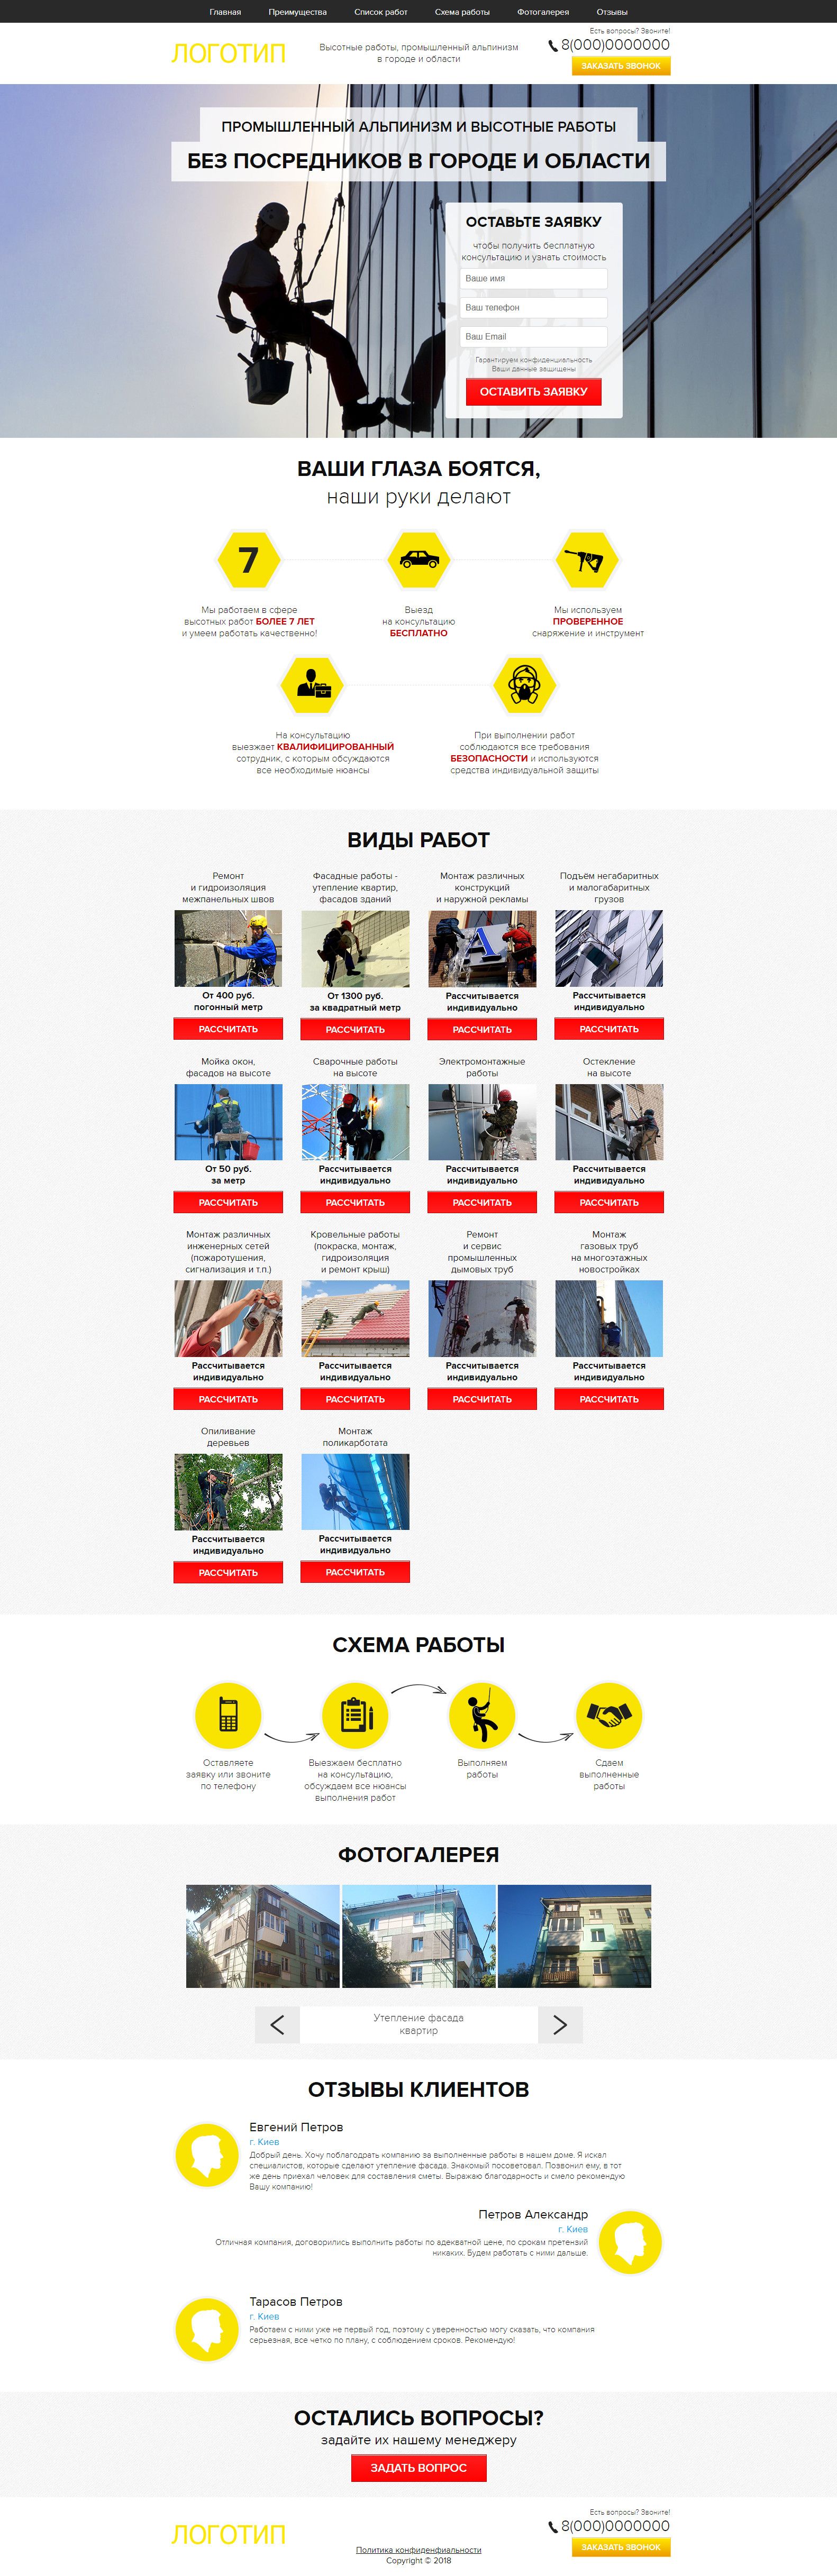 Landing page - Industrial mountaineering and high-altitude work